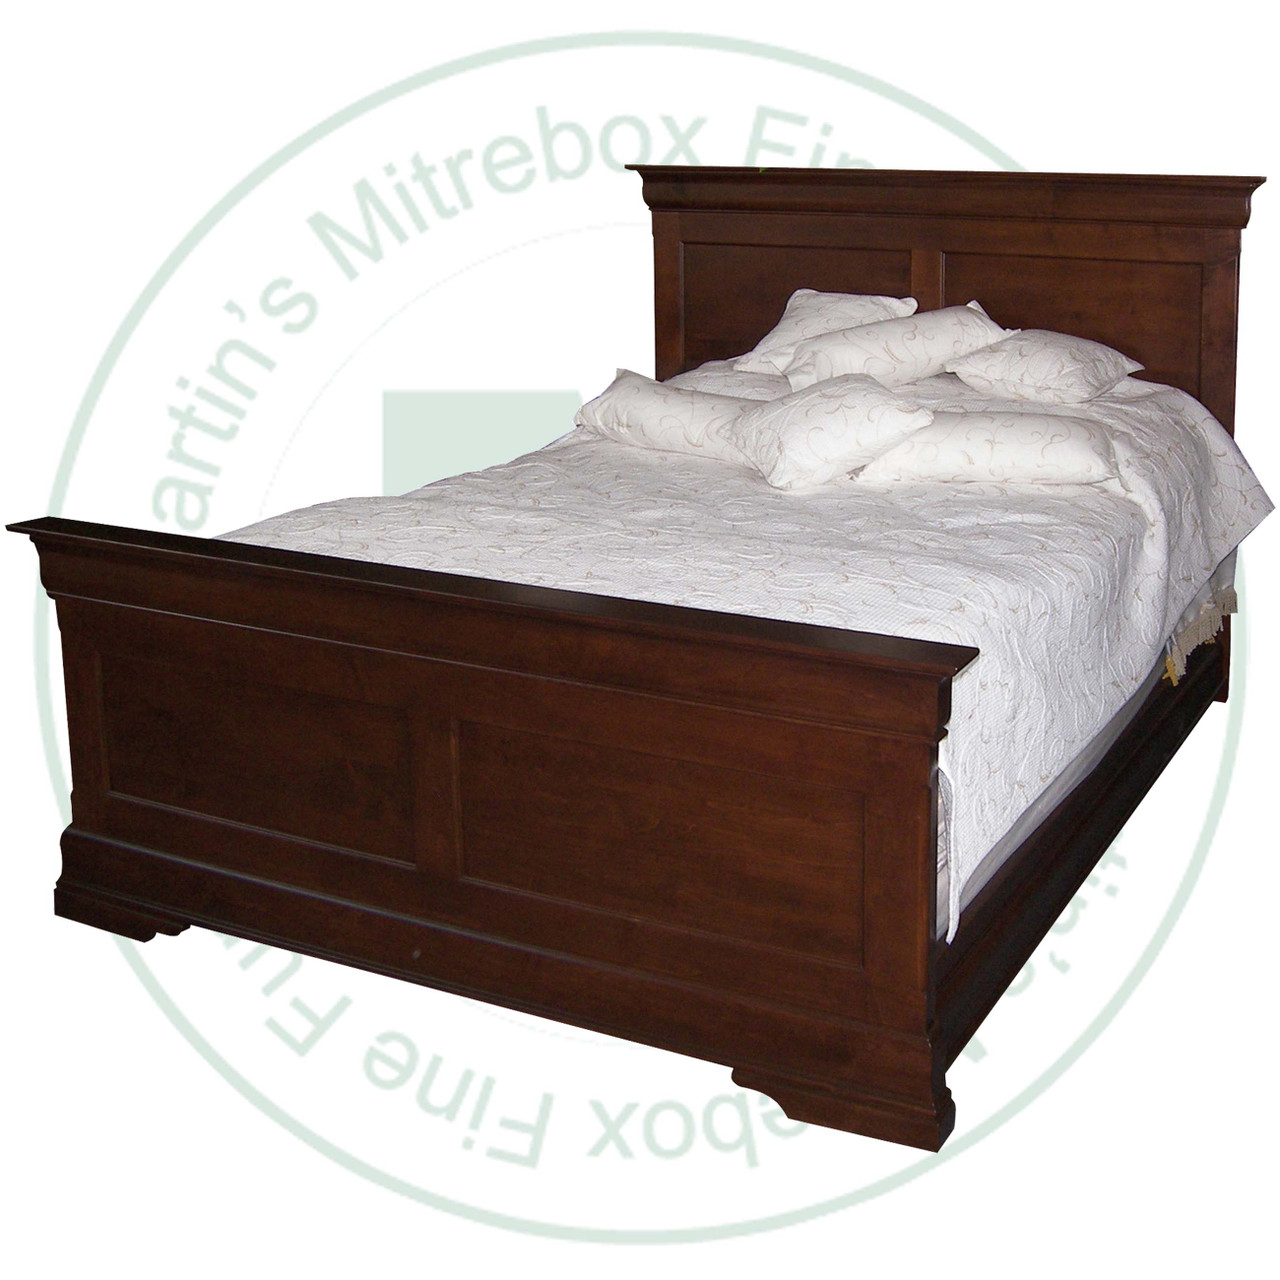 Oak Phillipe King Bed With High Footboard